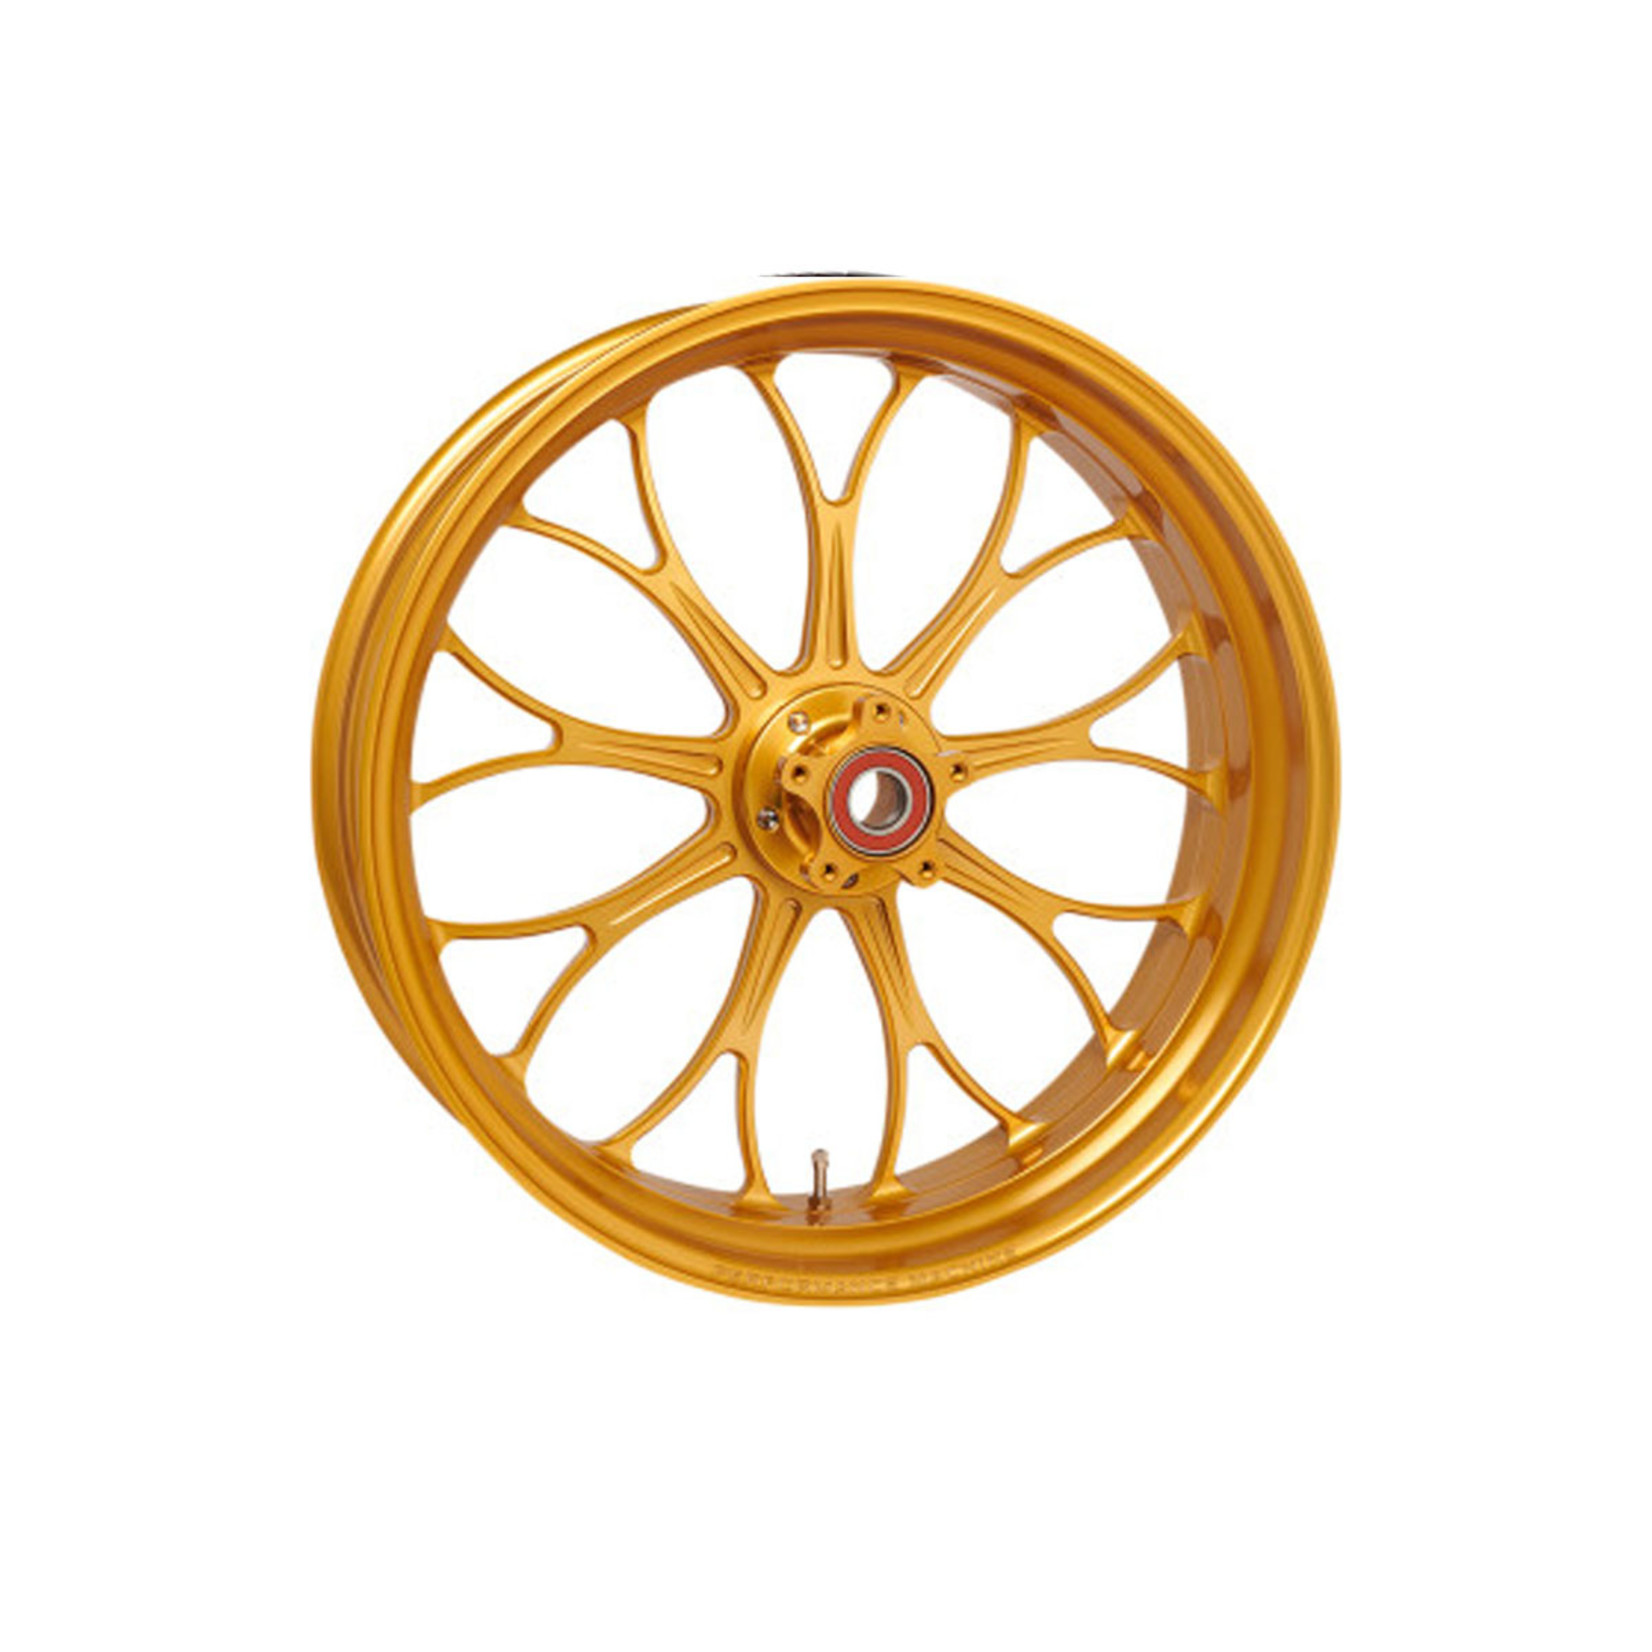 PERFORMANCE MACHINE PERFORMANCE MACHINE (PM) REVOLUTION DUAL DISC FRONT WHEEL Gold Ops™ - 21"x3.50" - With ABS